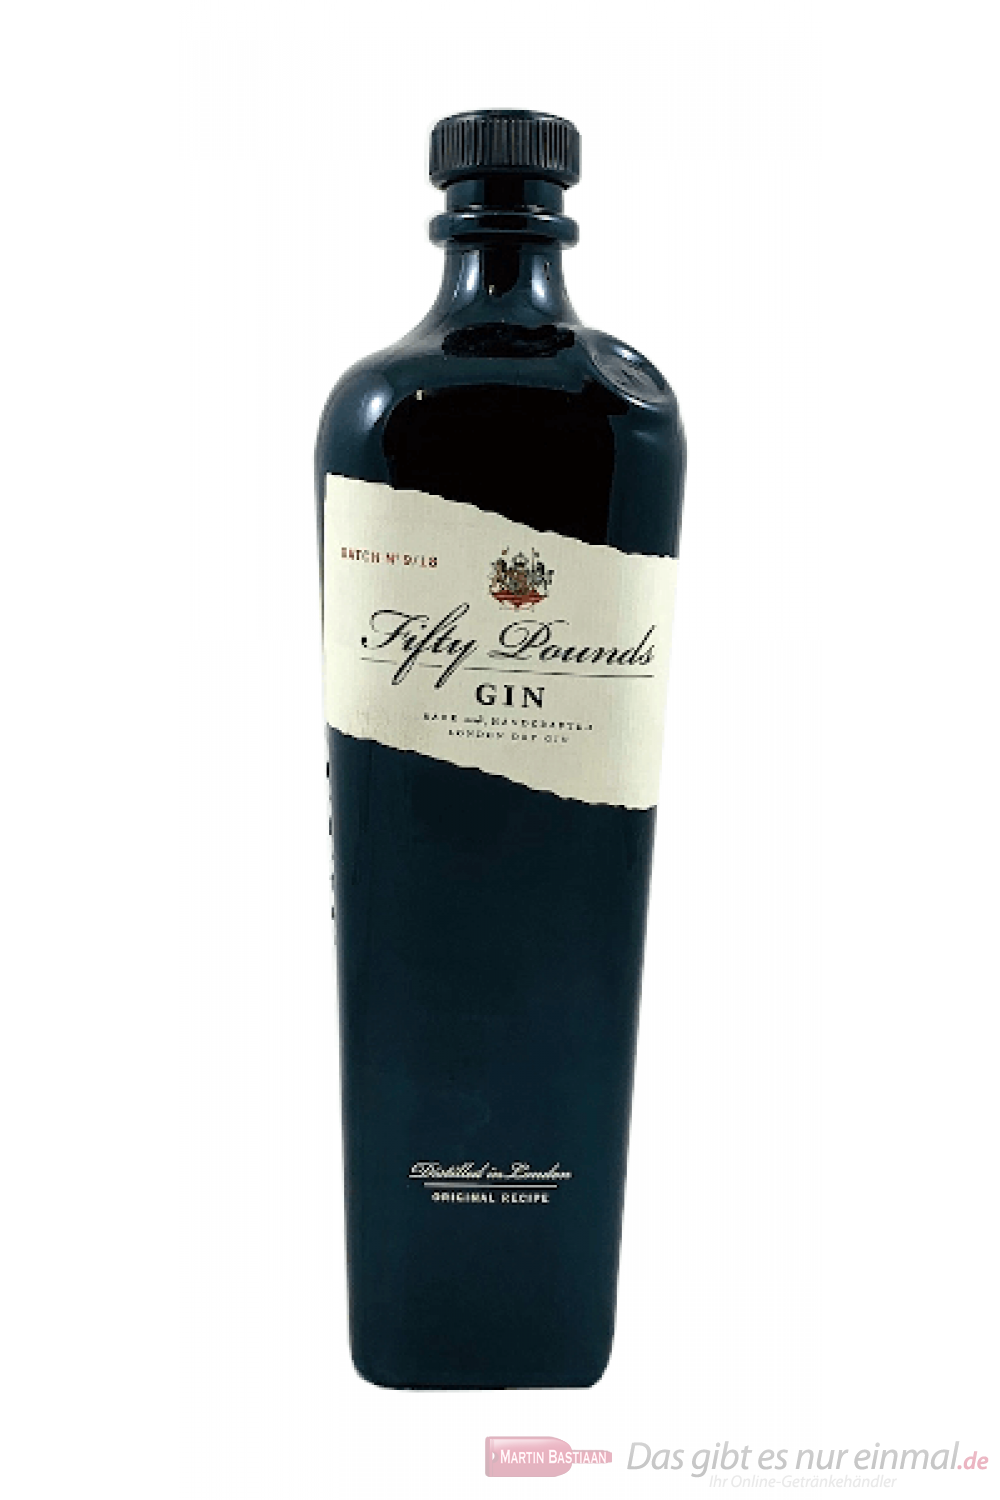 Fifty Pounds London Dry Gin 0,7l